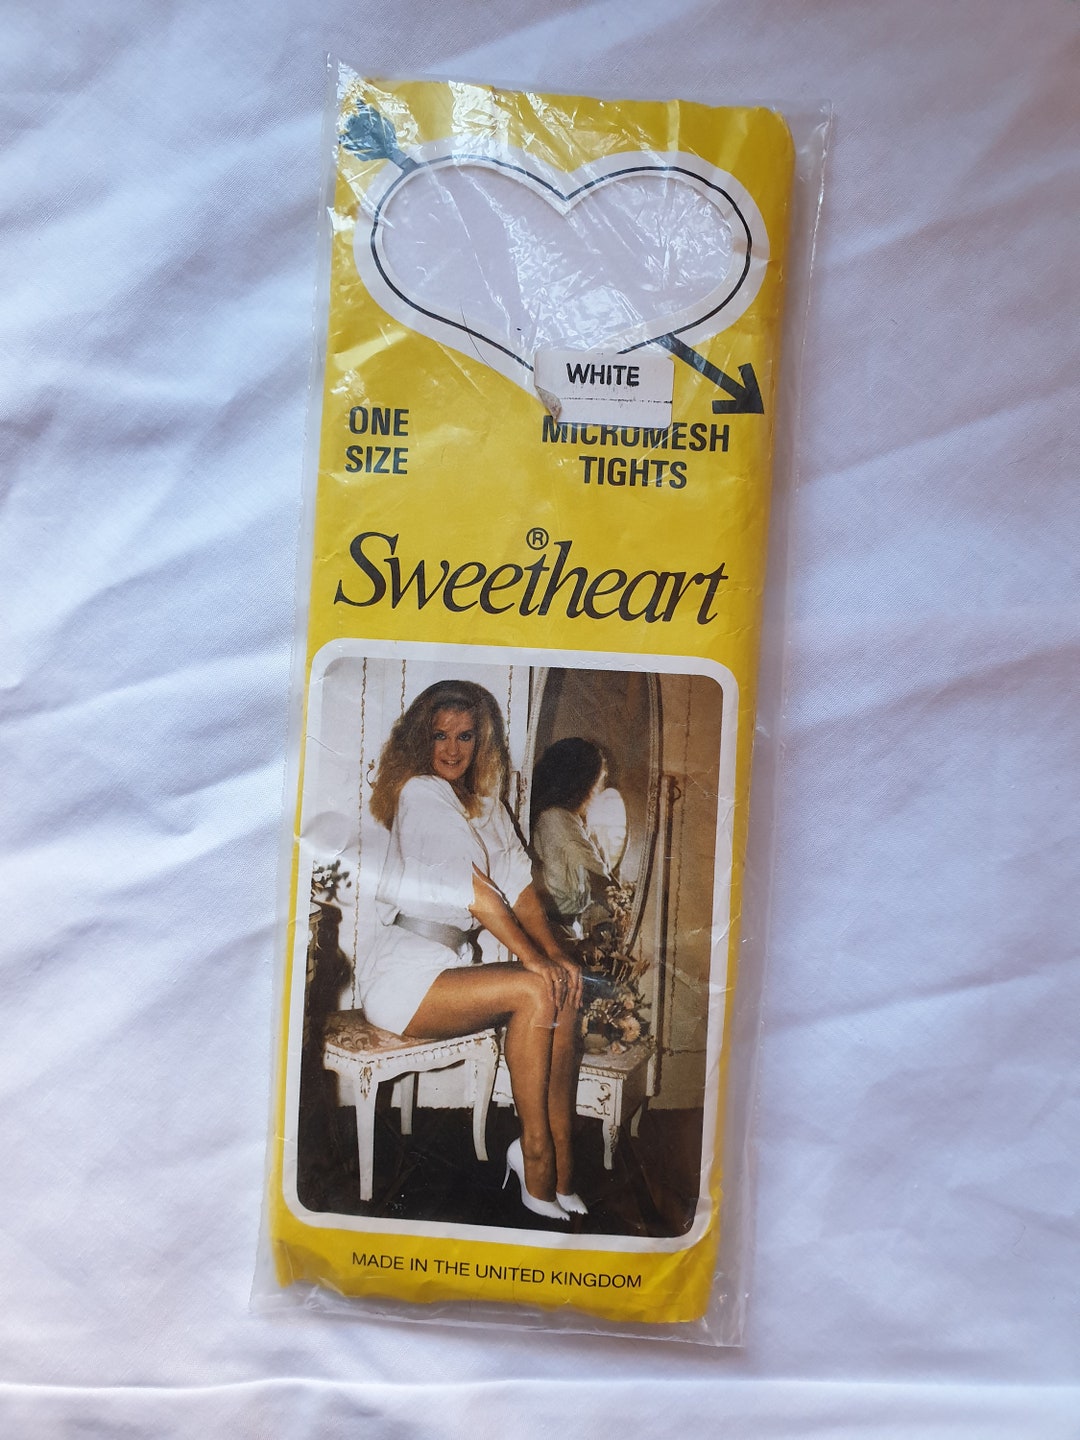 Vintage Tights, 1980s Tights, Pantihose, in White Micromesh, Lingerie  Advertising, Sweetheart 